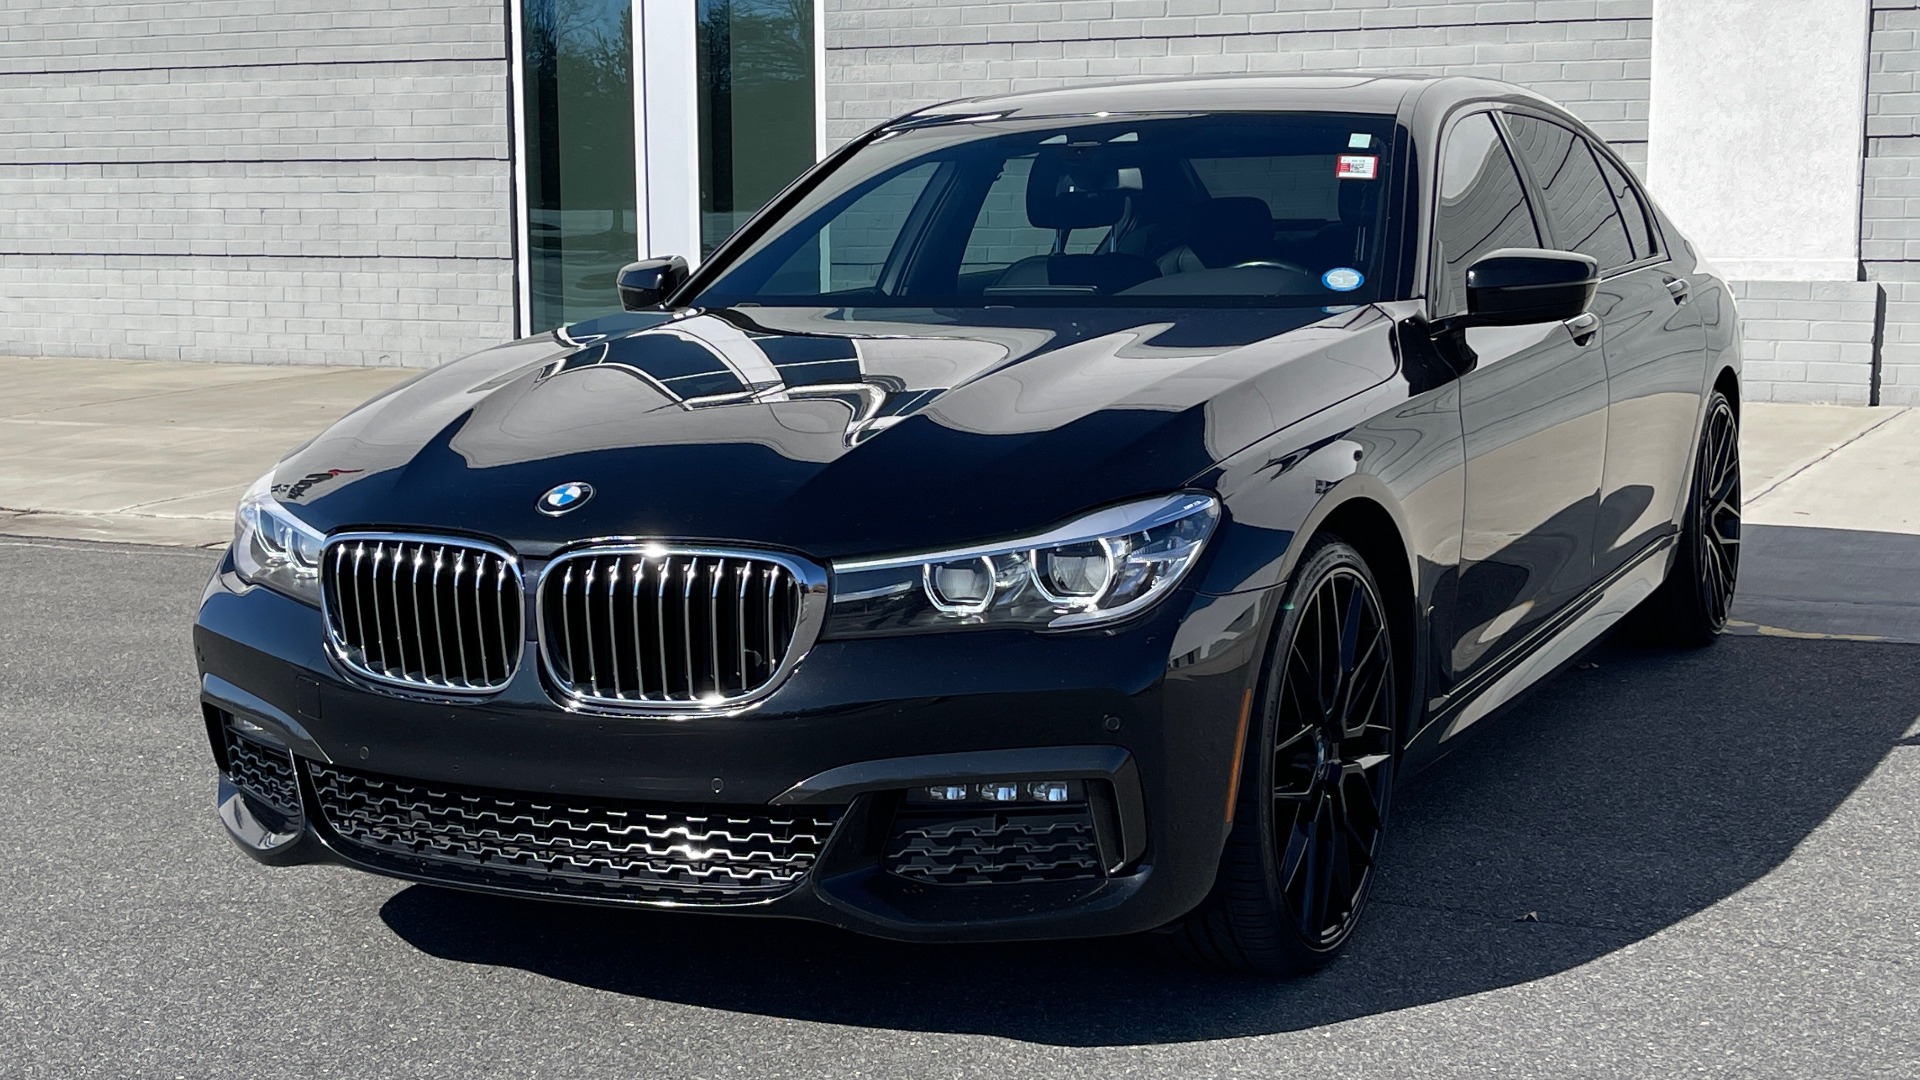 Used 2019 BMW 7 SERIES 740I XDRIVE M-SPORT / CLD WTHR / NAV / SUNROOF / REARVIEW / 22IN WHLS for sale Sold at Formula Imports in Charlotte NC 28227 2